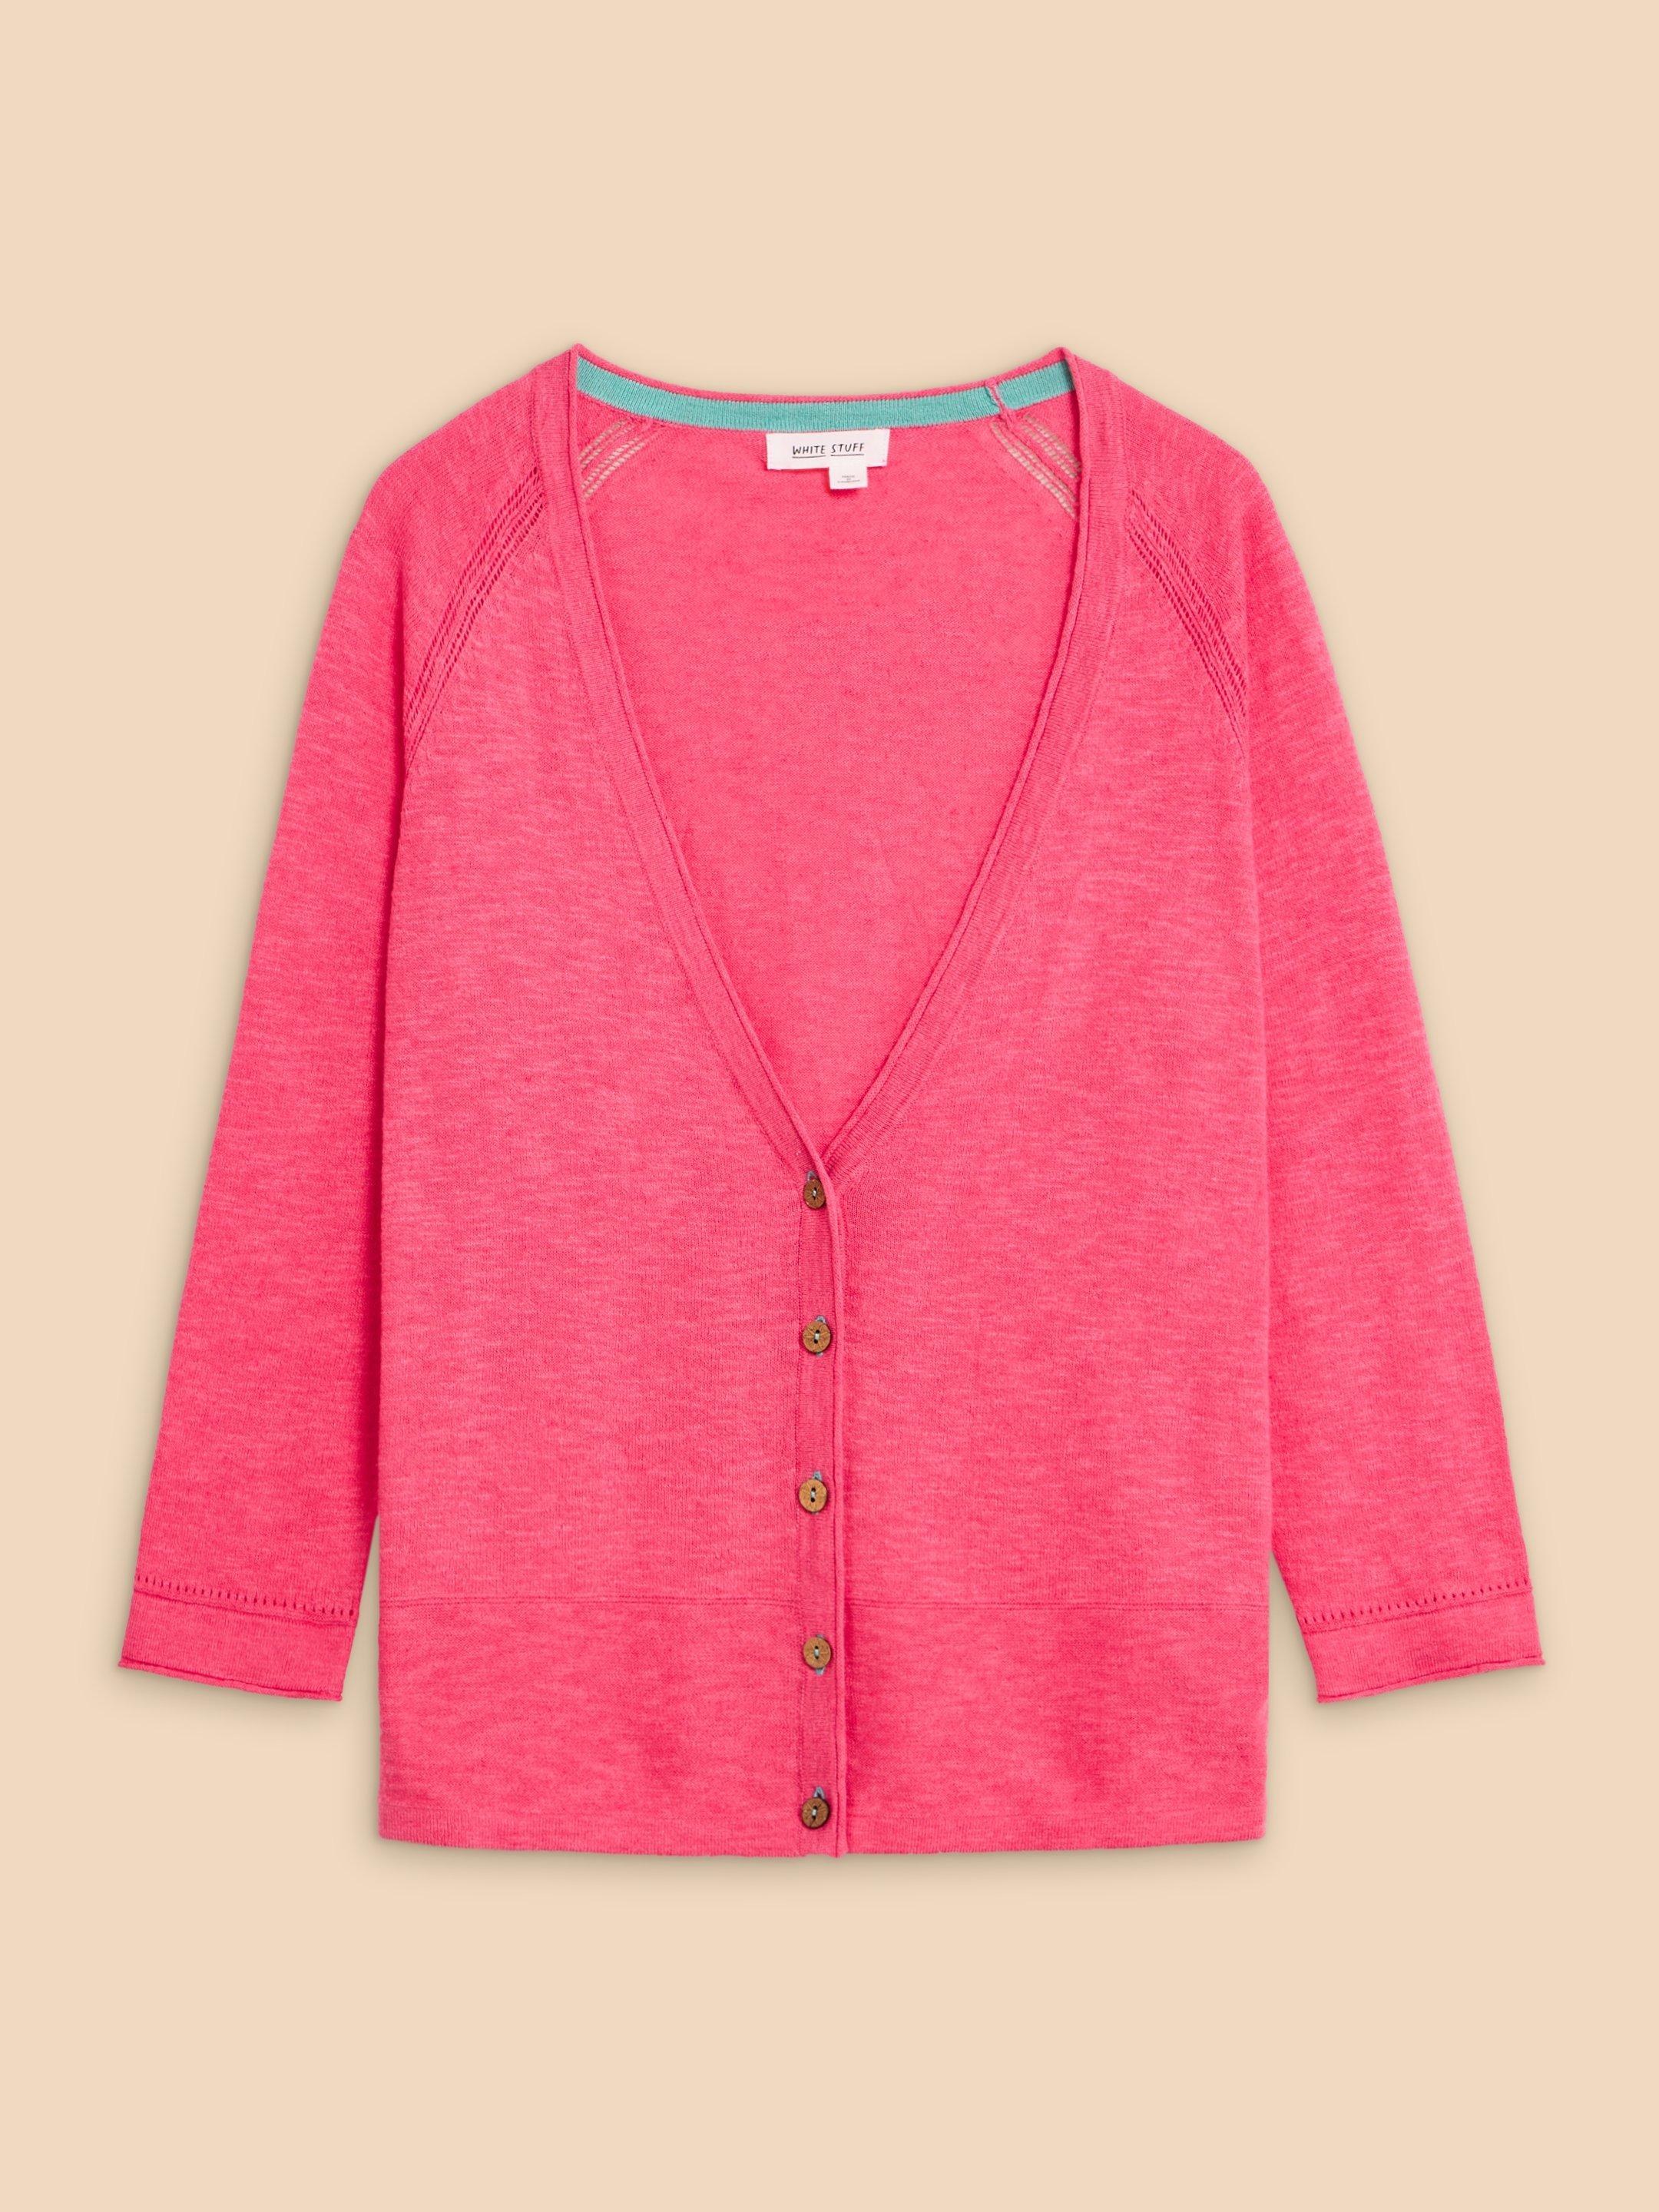 NARIA V  NECK CARDI in BRT PINK - FLAT FRONT